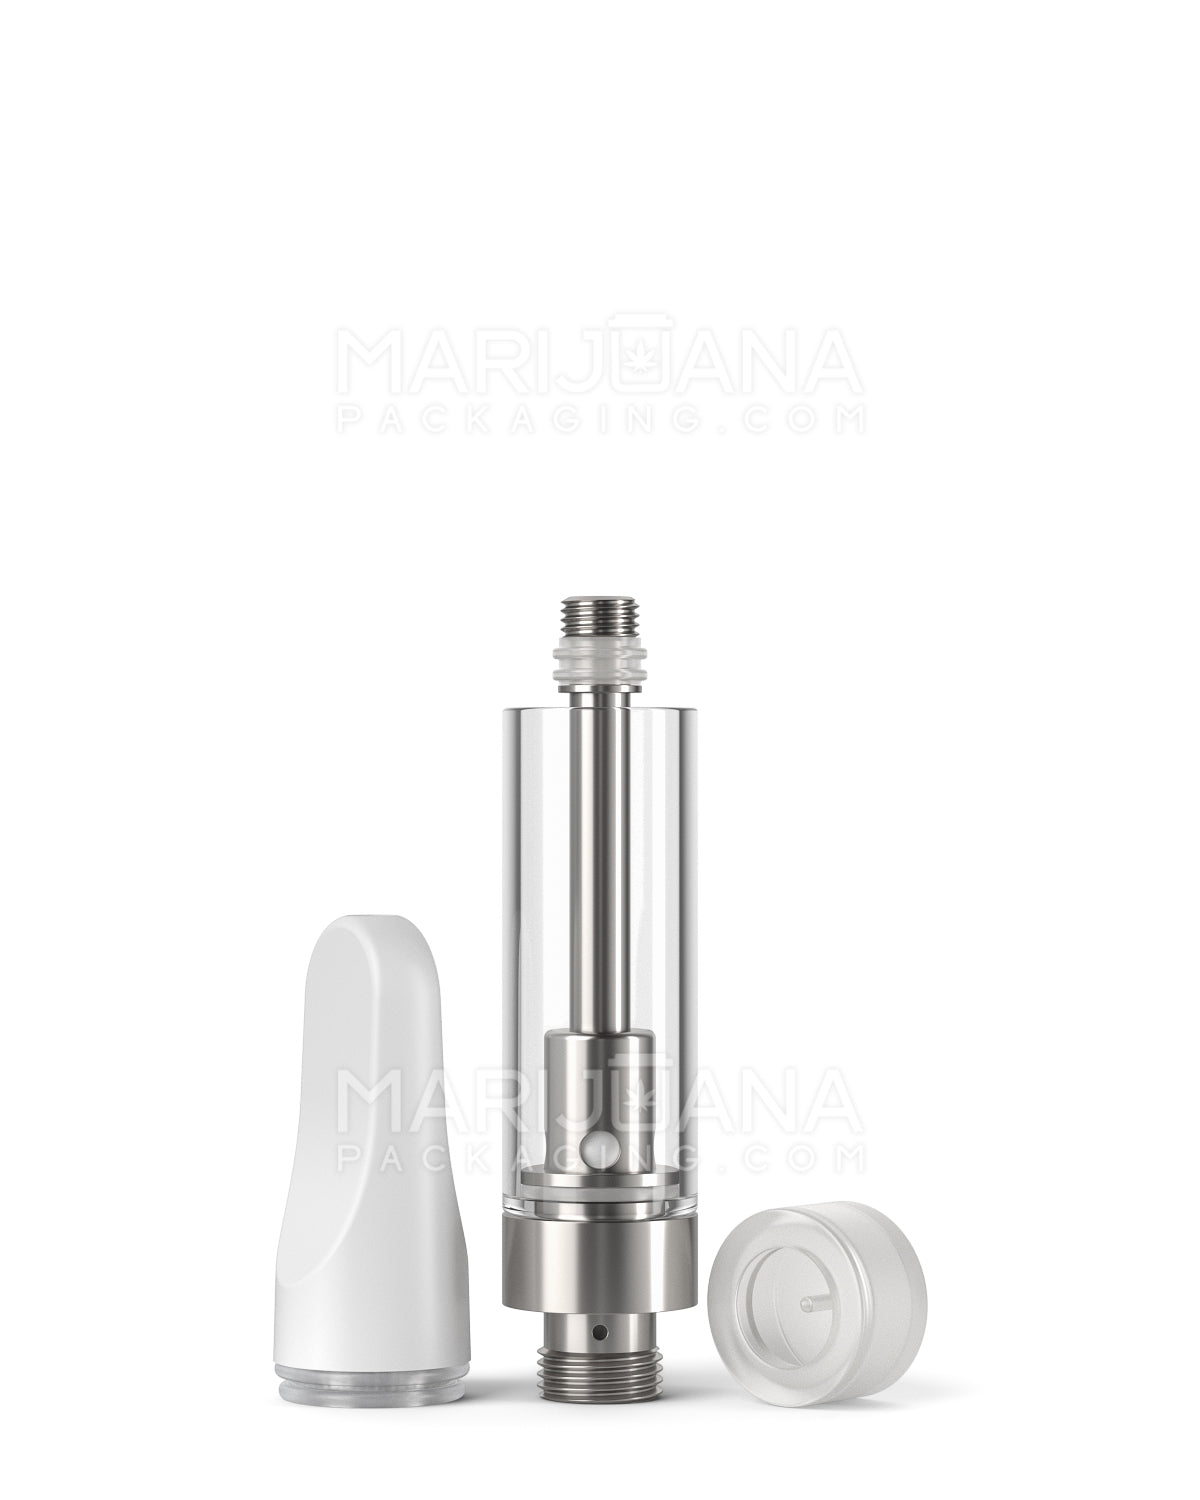 CCELL | Liquid6 Reactor Glass Vape Cartridge with White Plastic Mouthpiece | 1mL - Screw On - 100 Count - 5